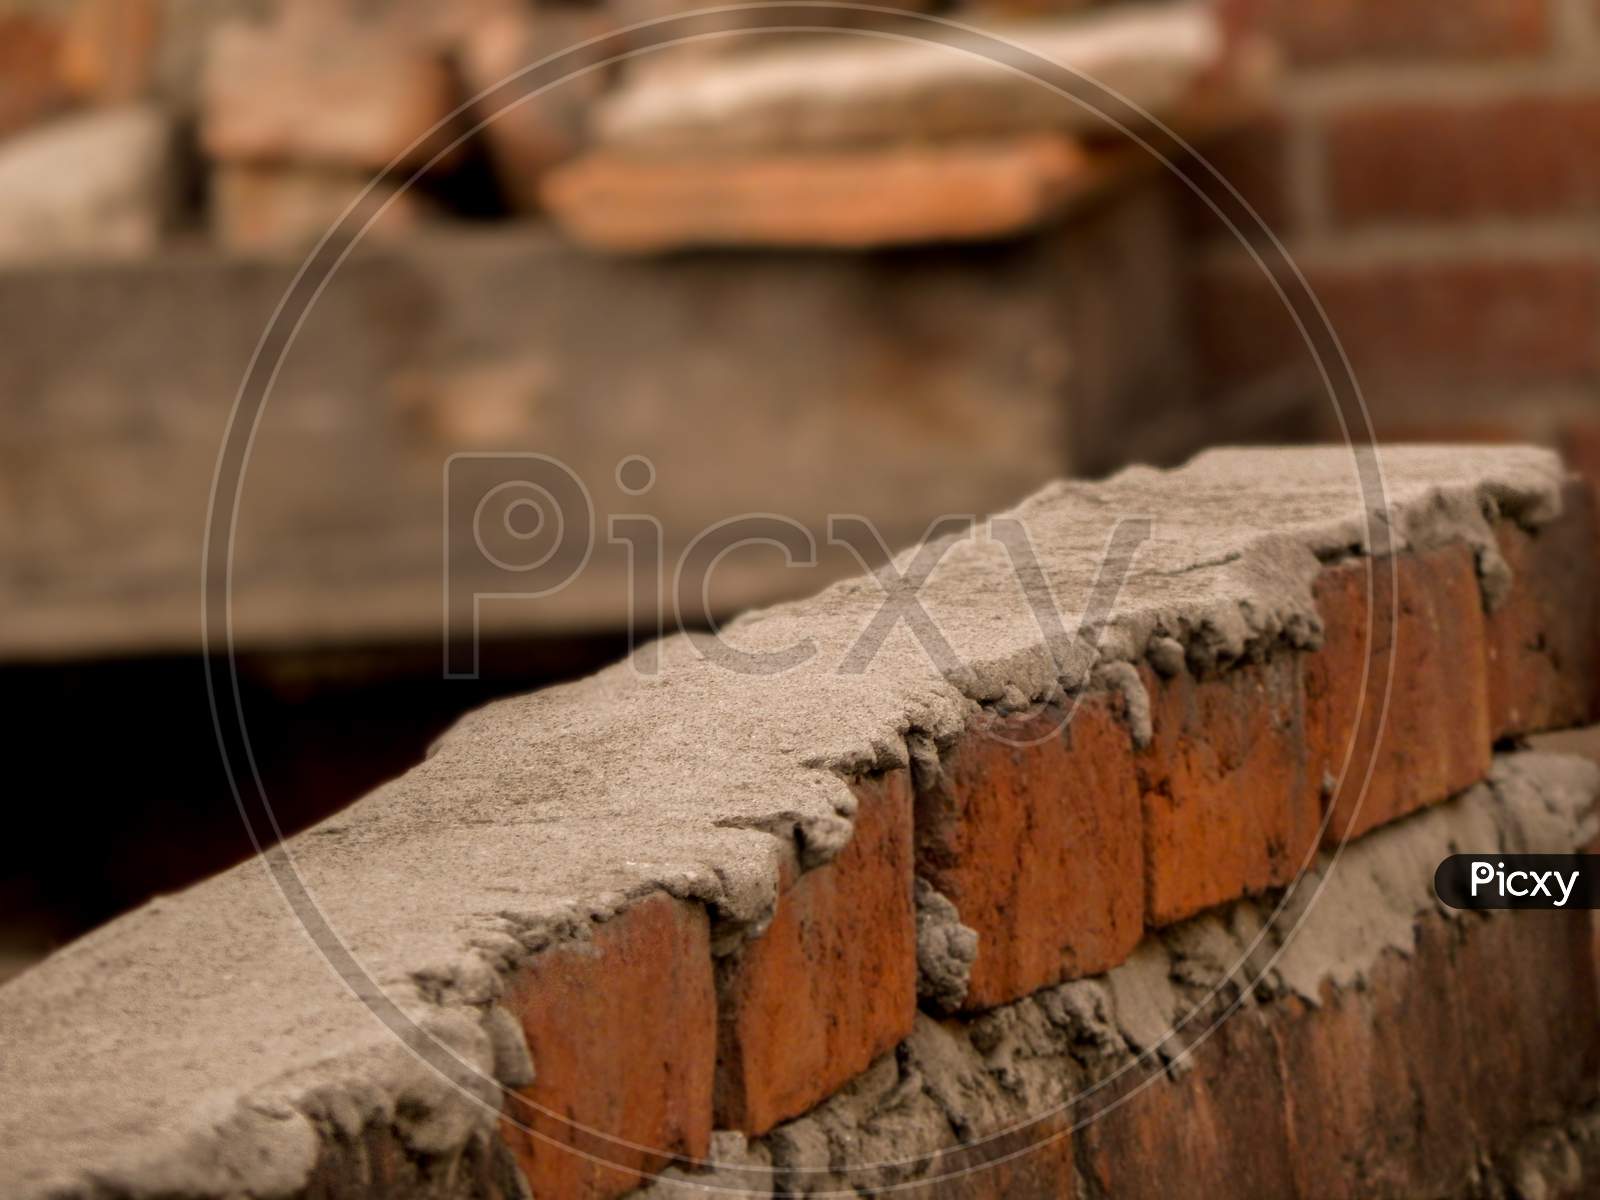 Cemented bricked wall with foreground in focus.